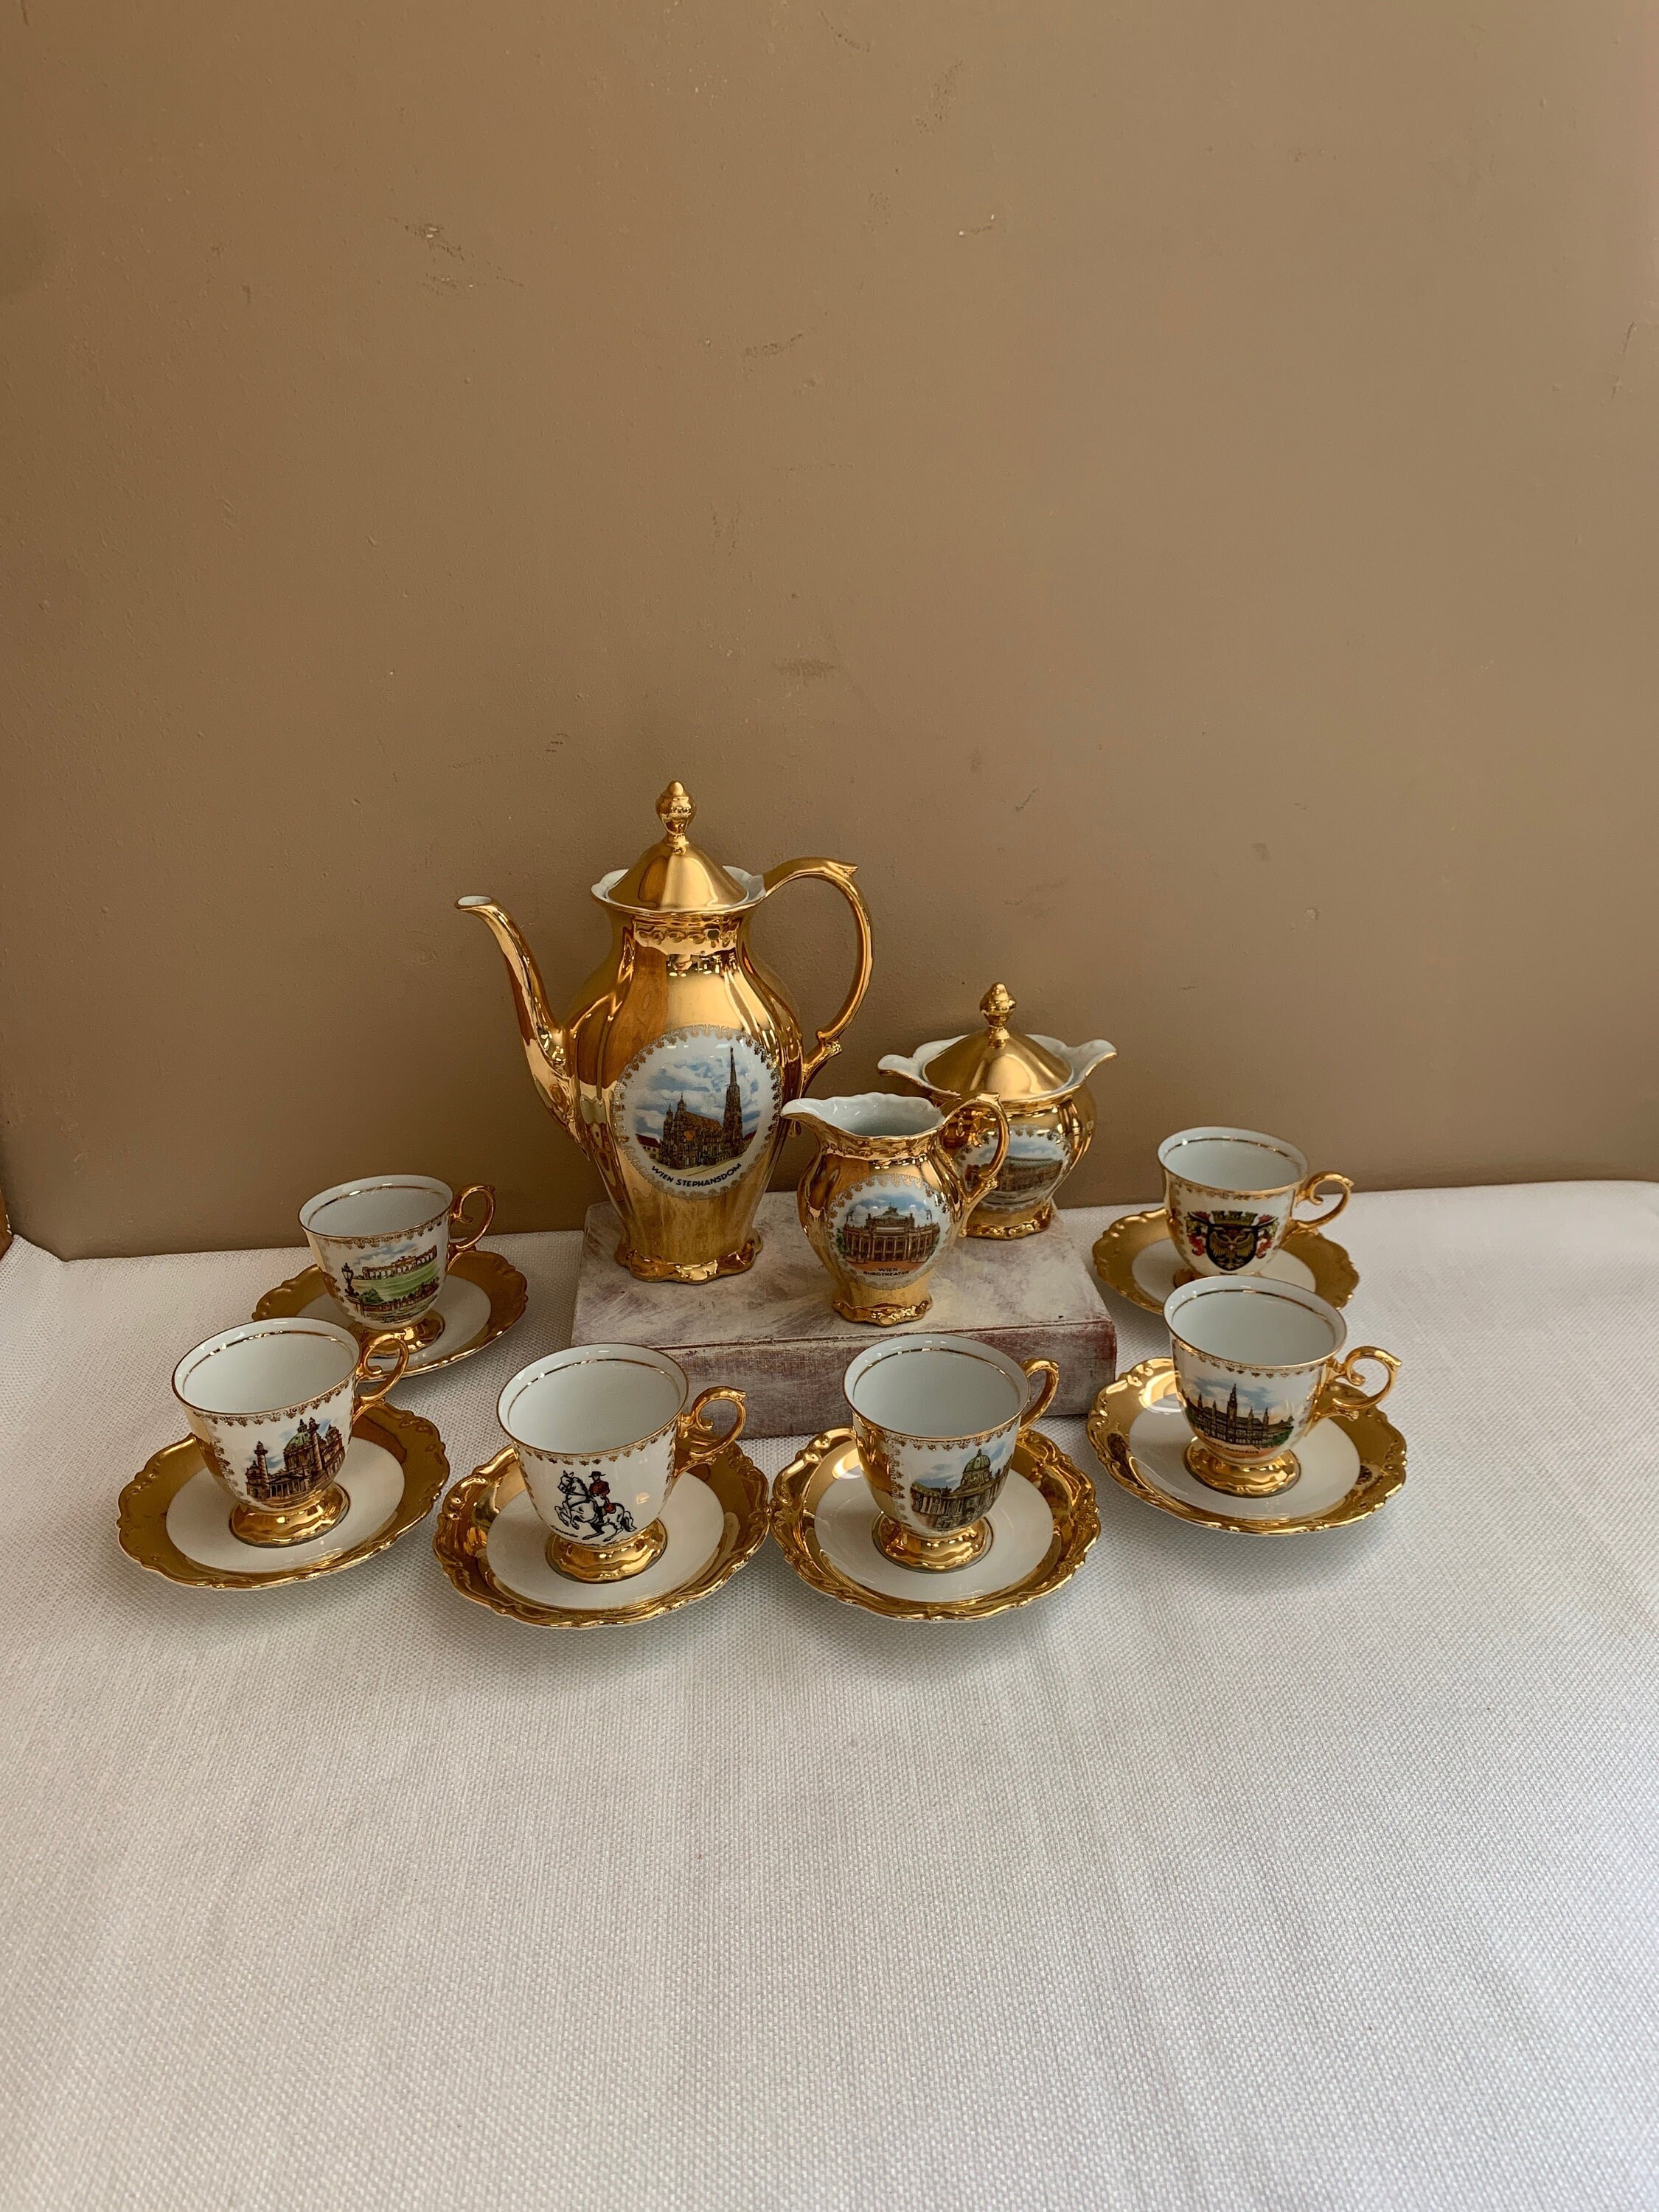 Bavarian Ceramic Coffee or Tea Set for 6, Vintage Wien Vienna Porcelain  Demitasse With Six Cups and Saucers, Gold With Pictures - Etsy